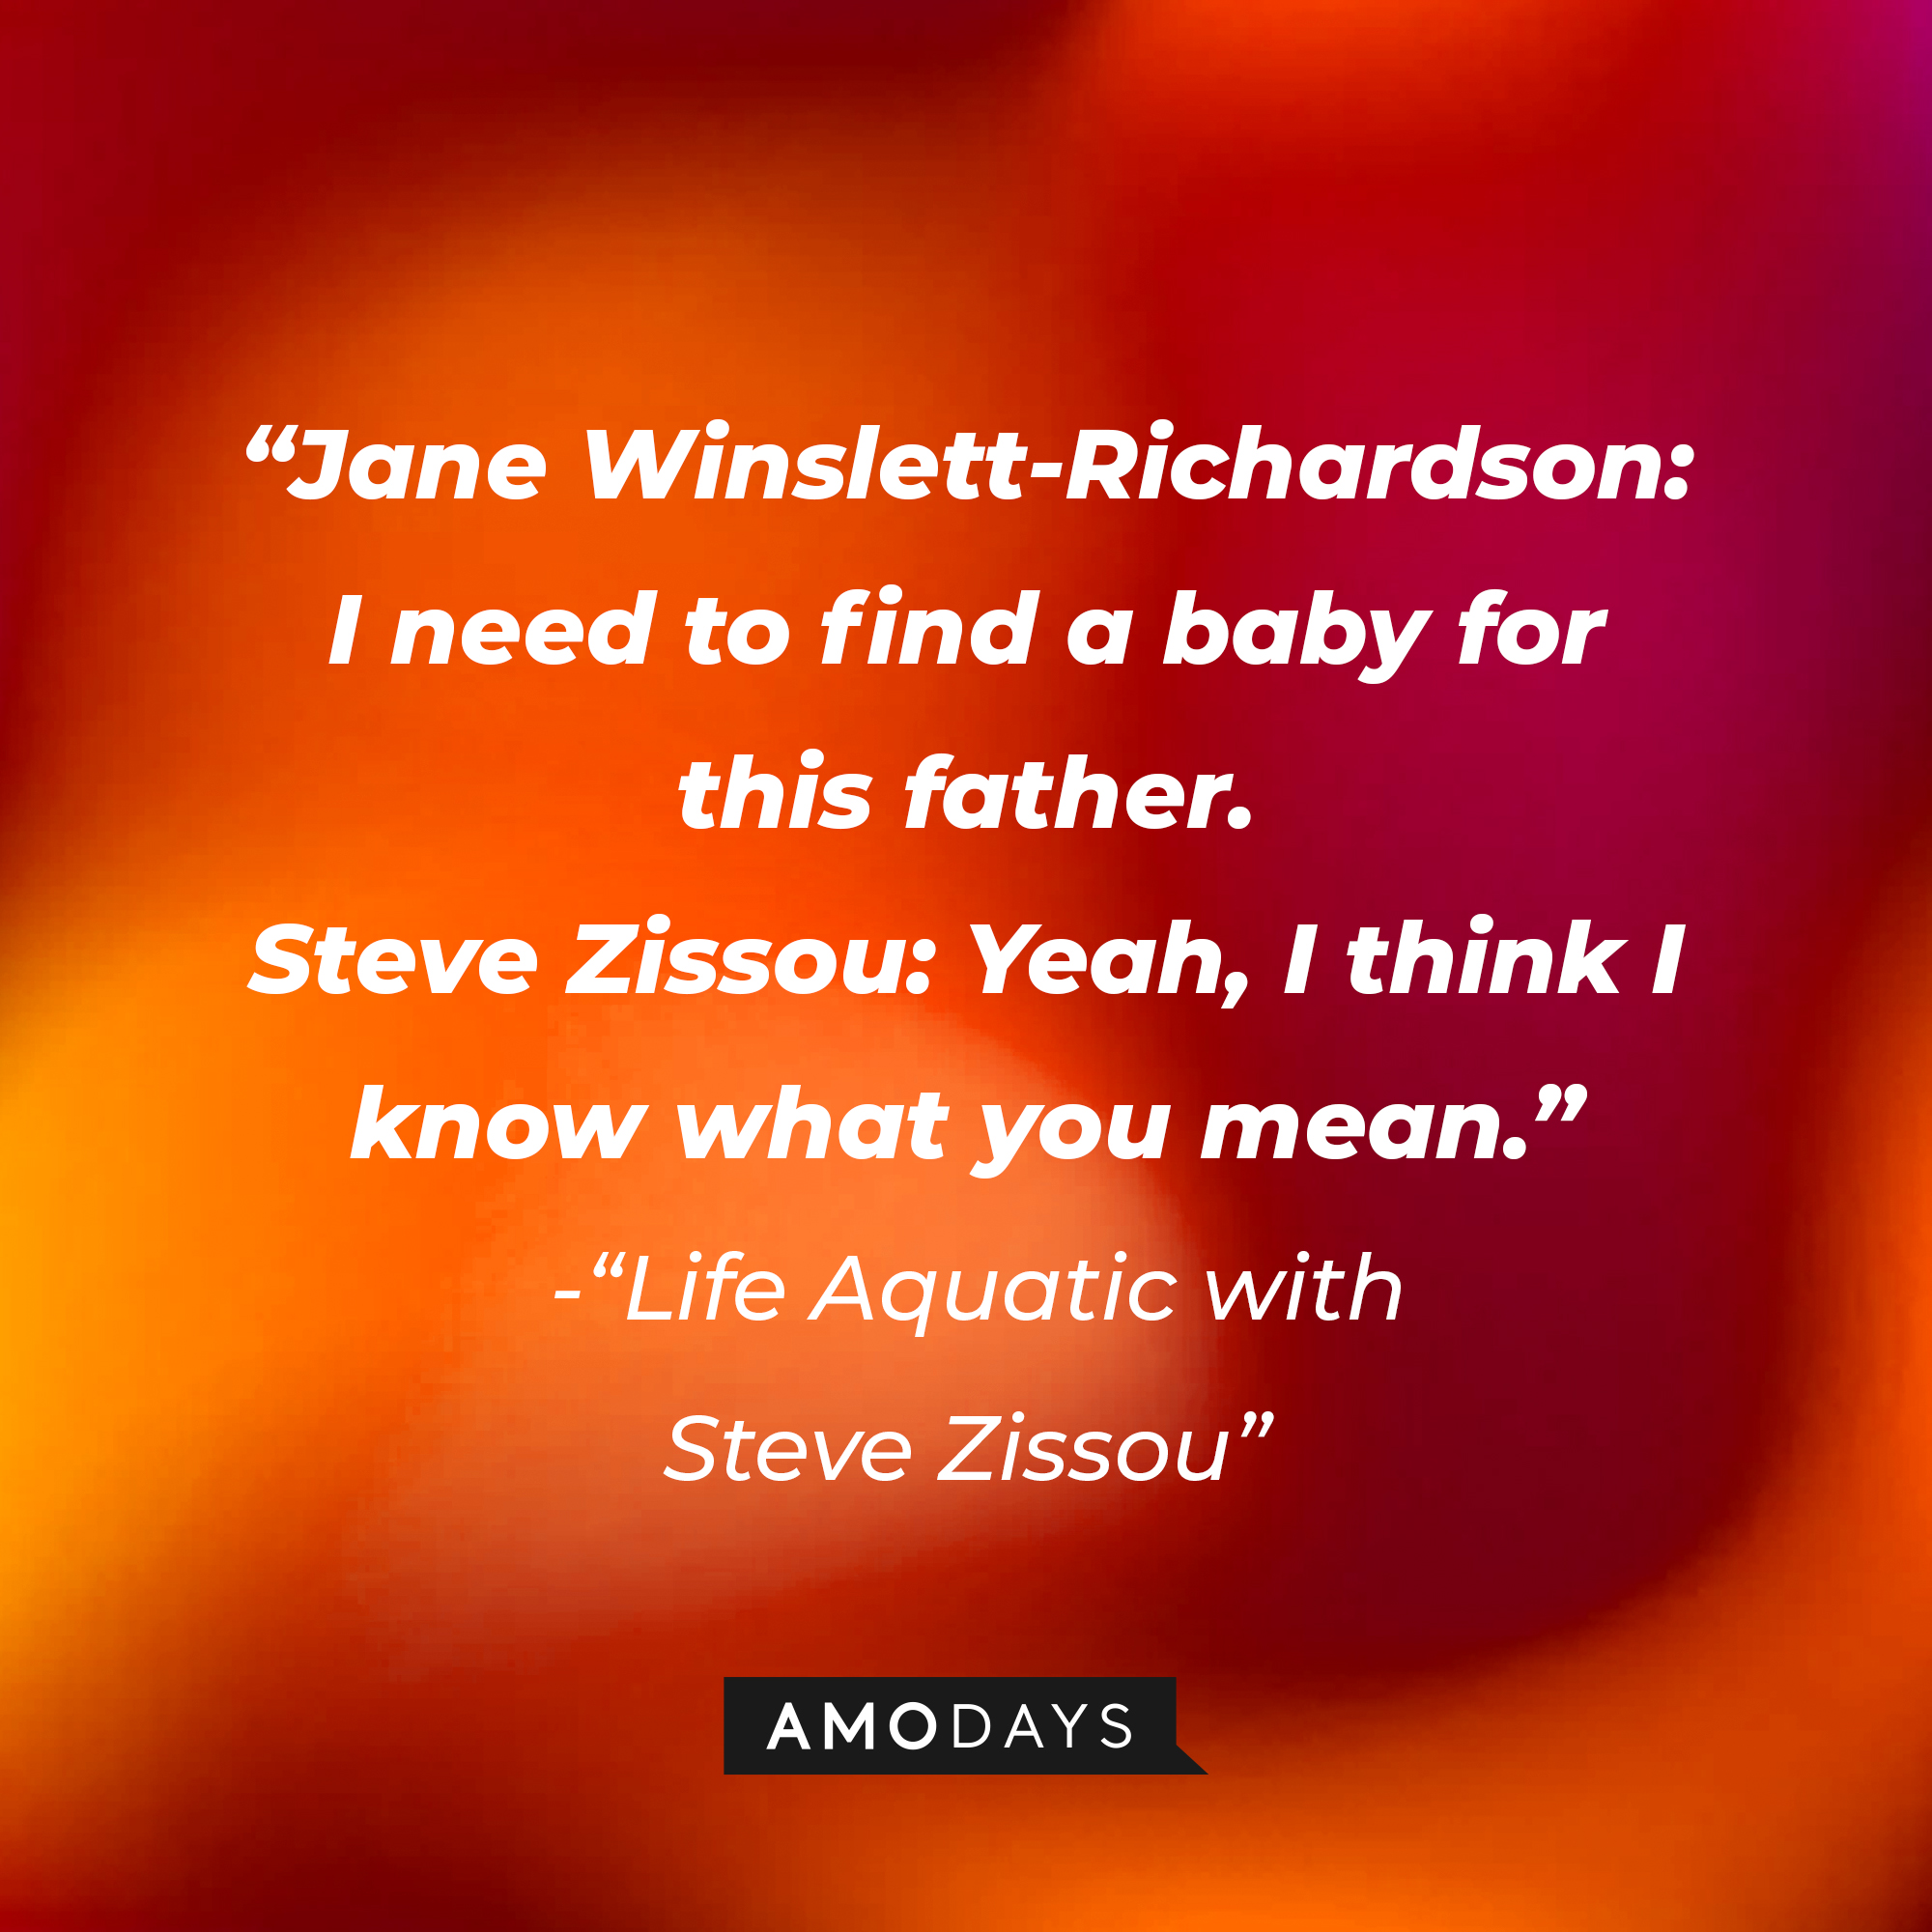 A photo with the dialoge, "Jane Winslett-Richardson: I need to find a baby for this father. Steve Zissou: Yeah, I think I know what you mean." | Source: Amodays